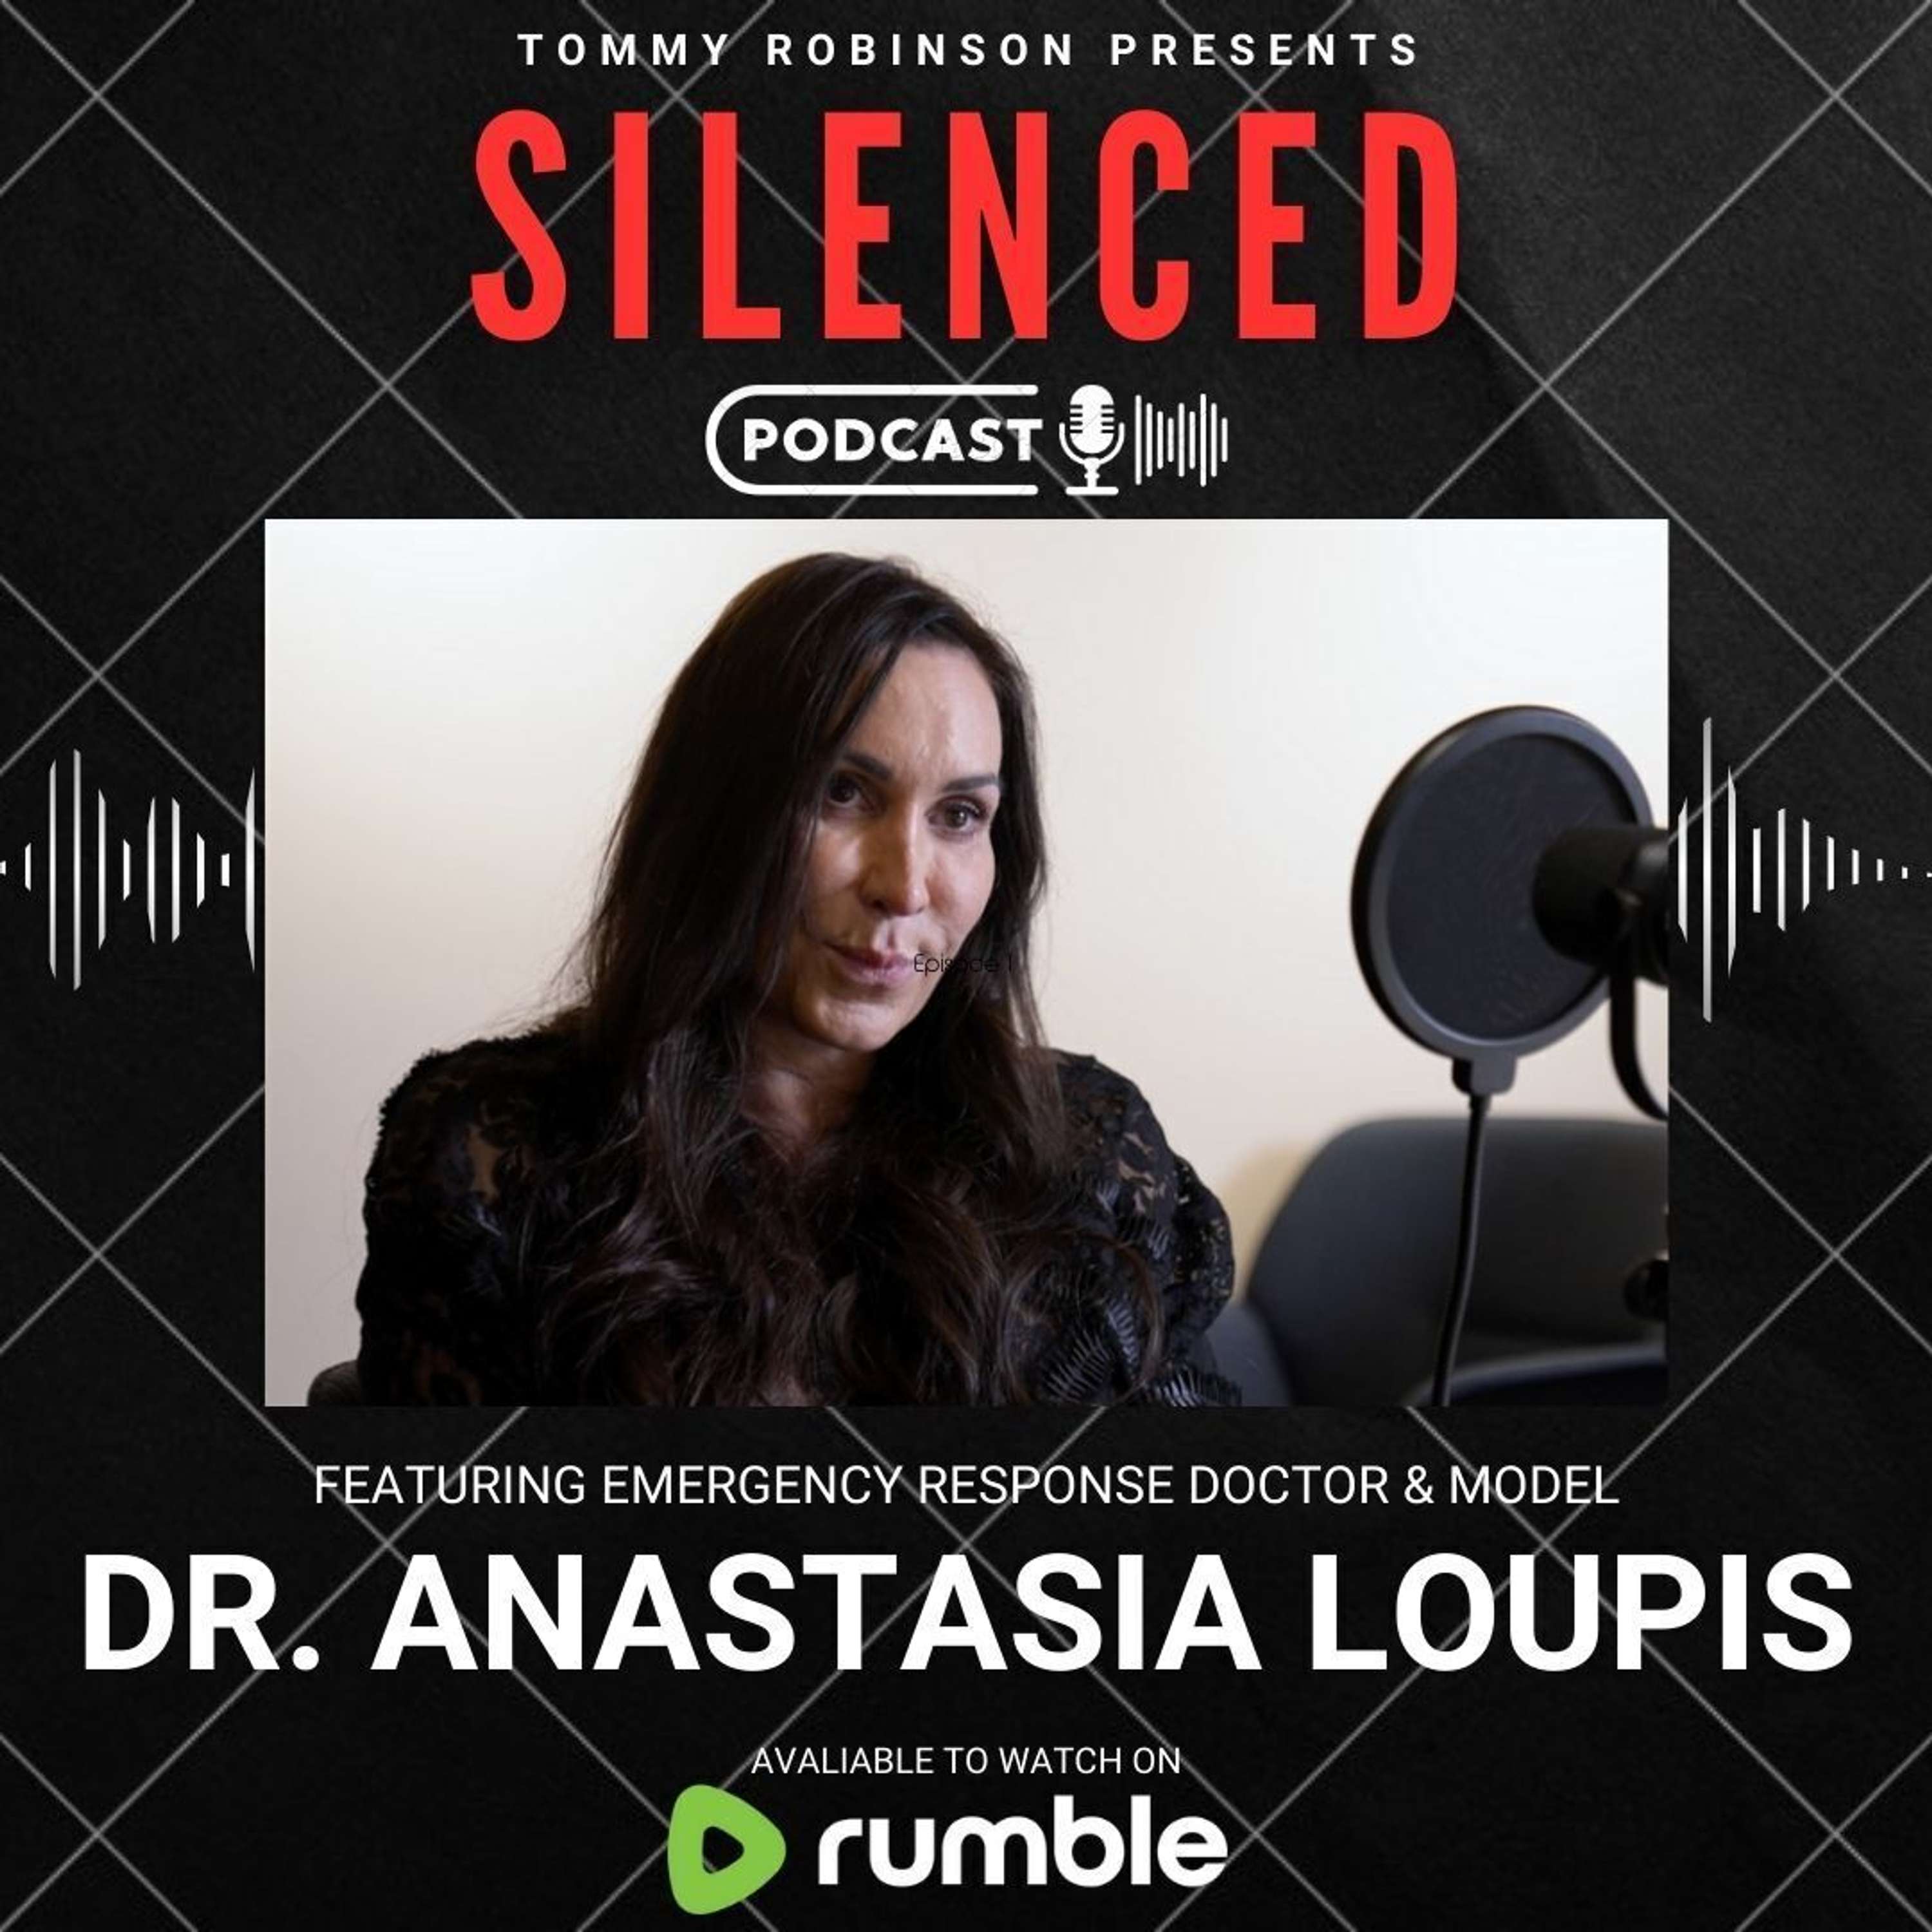 Episode 22 - SILENCED with Tommy Robinson - Dr. Anastasia Maria Loupis